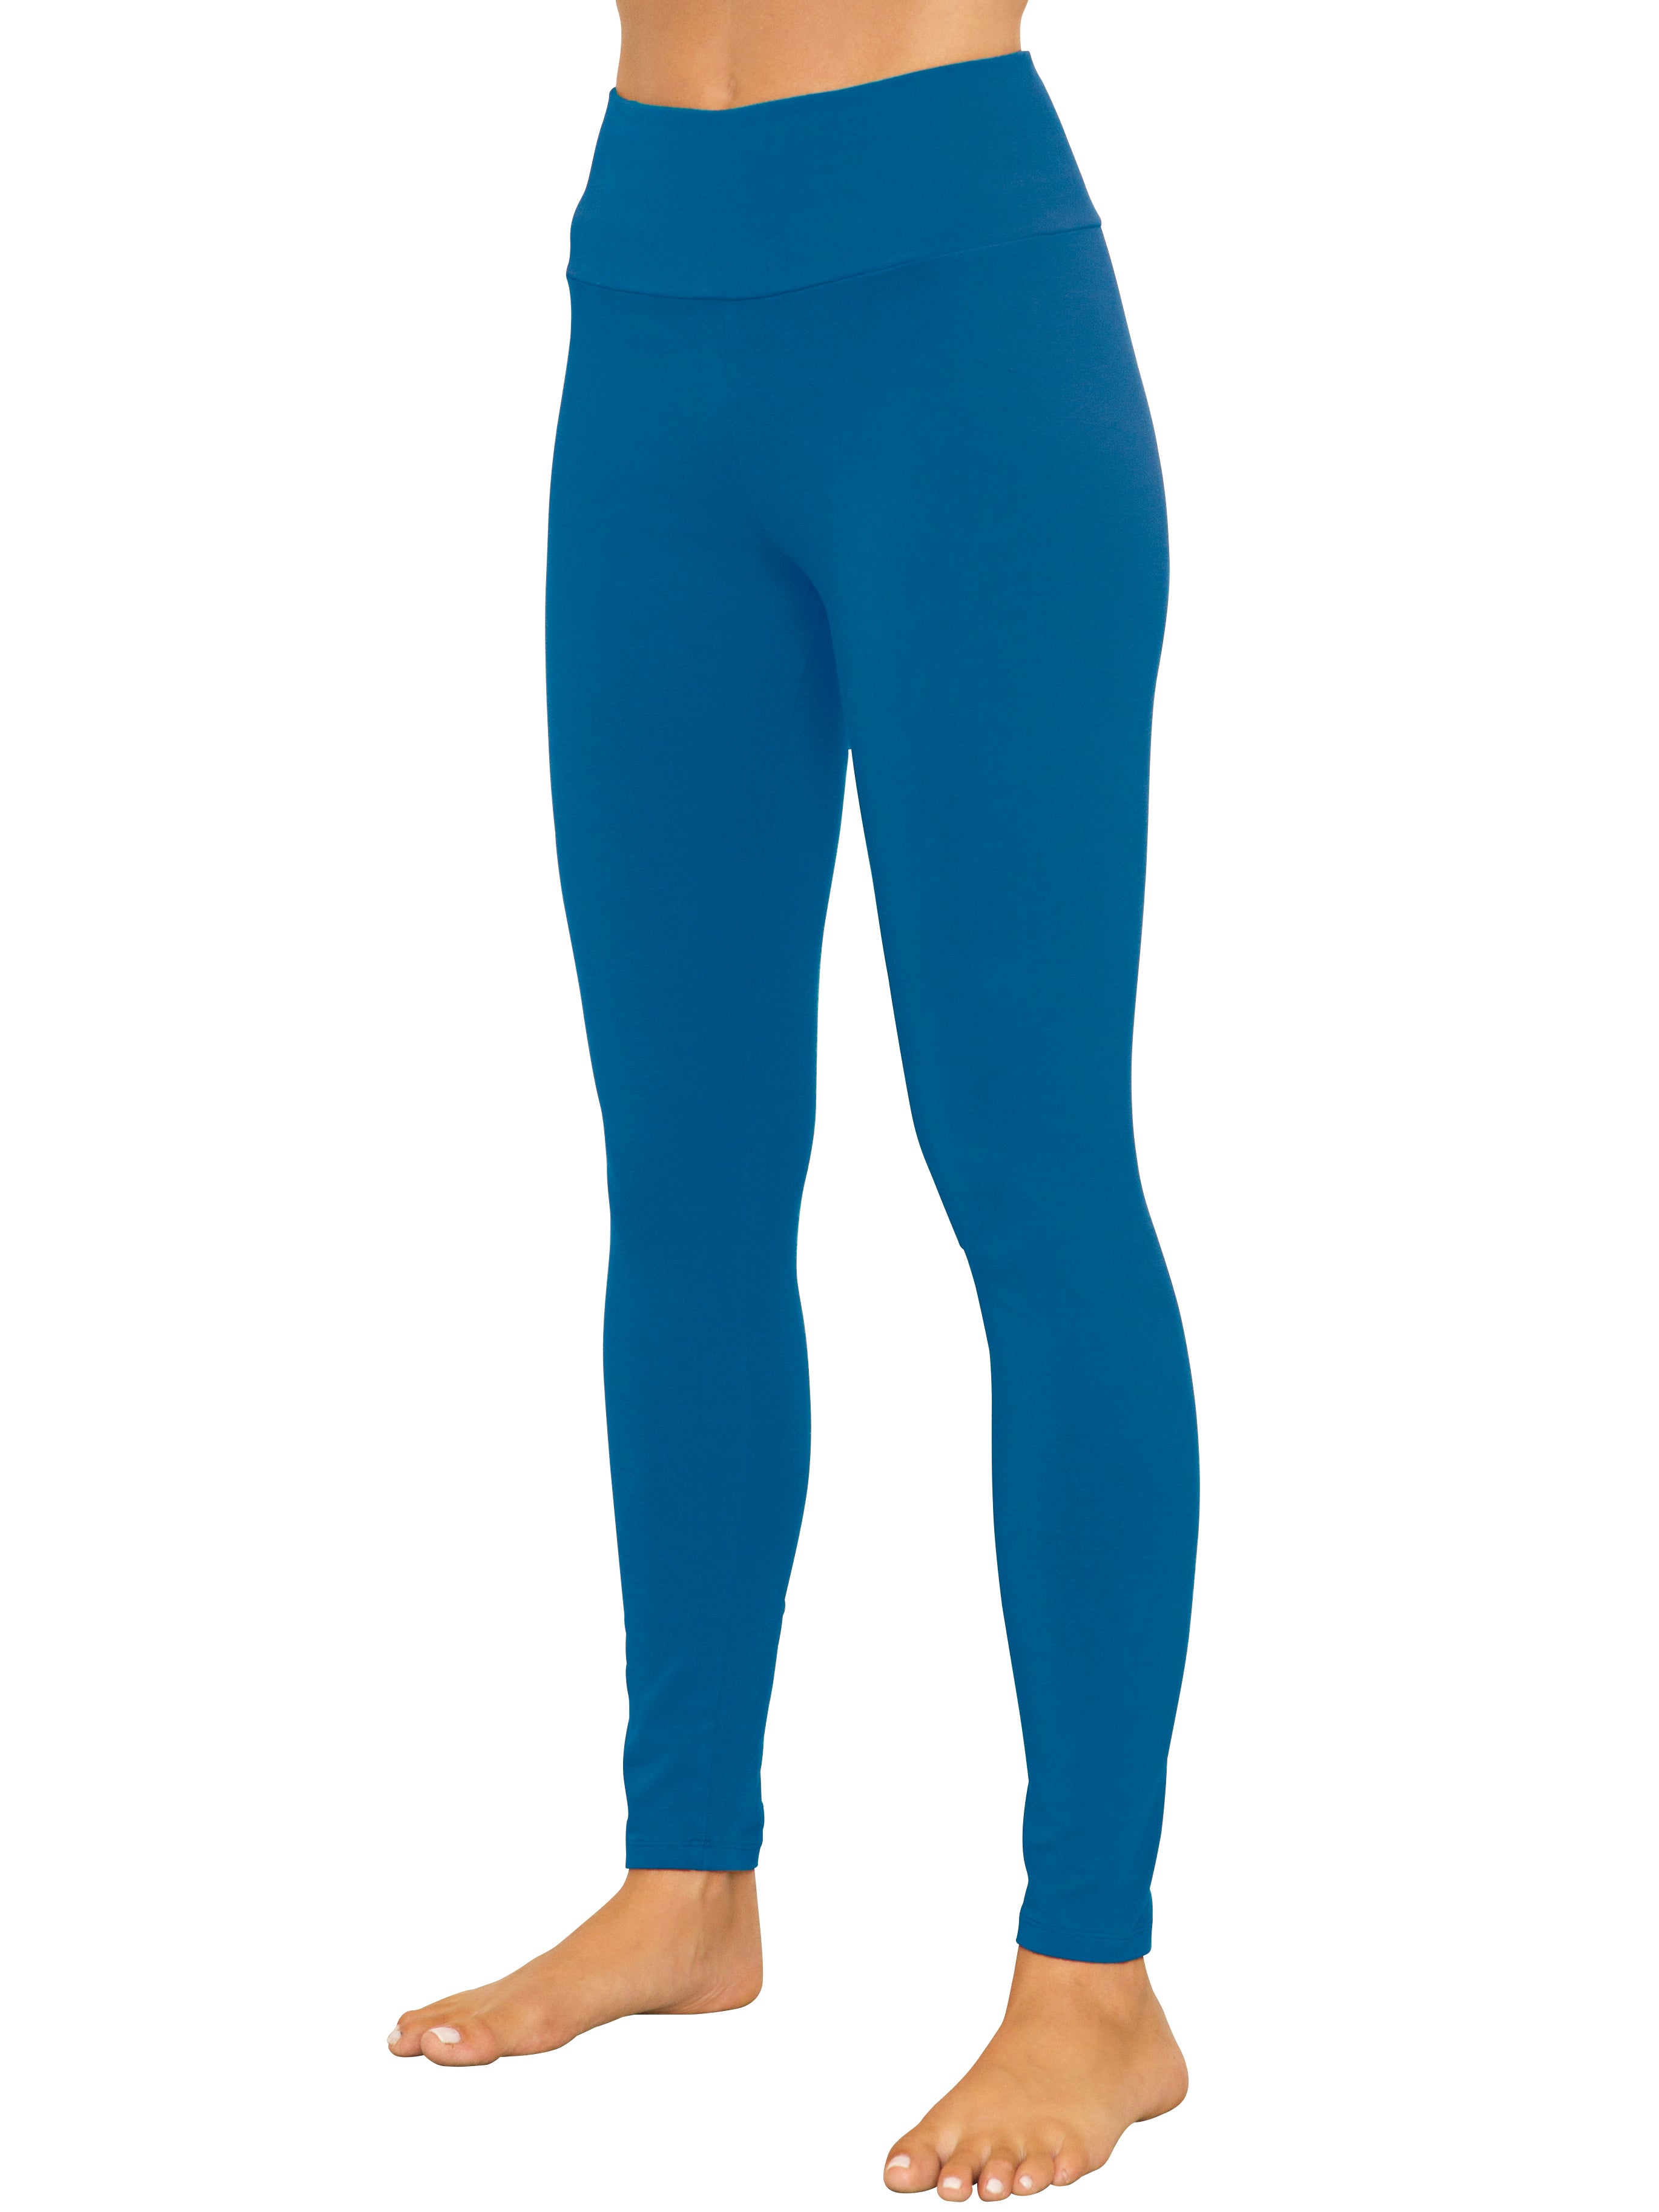 Ultra Low Rise Blue Leggings Leggings for Women Cotton Super Low Rise Yoga  Workout Fitness Full Length Made in USA -  Canada